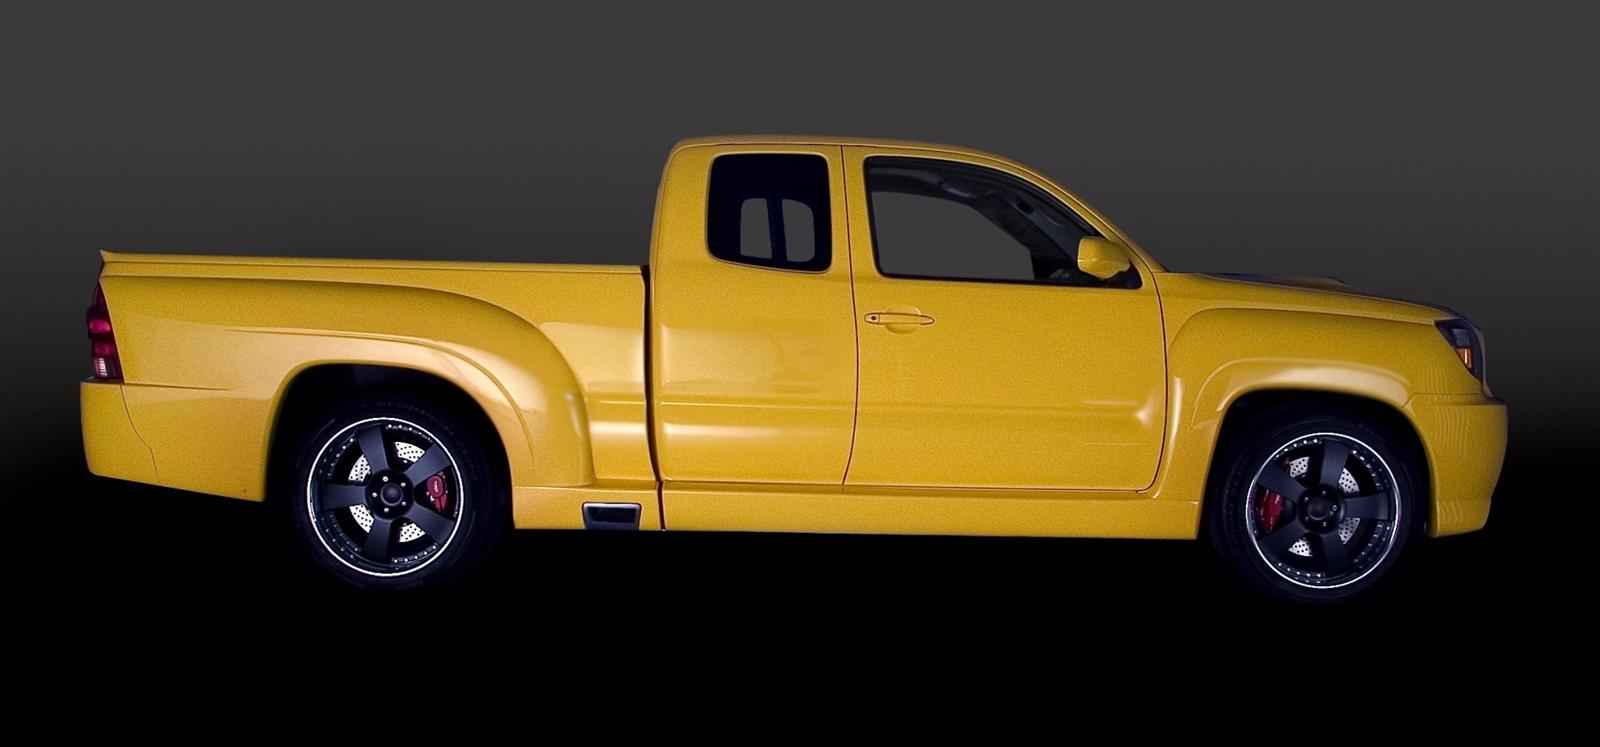 2008 Toyota Tacoma X-Runner Concept